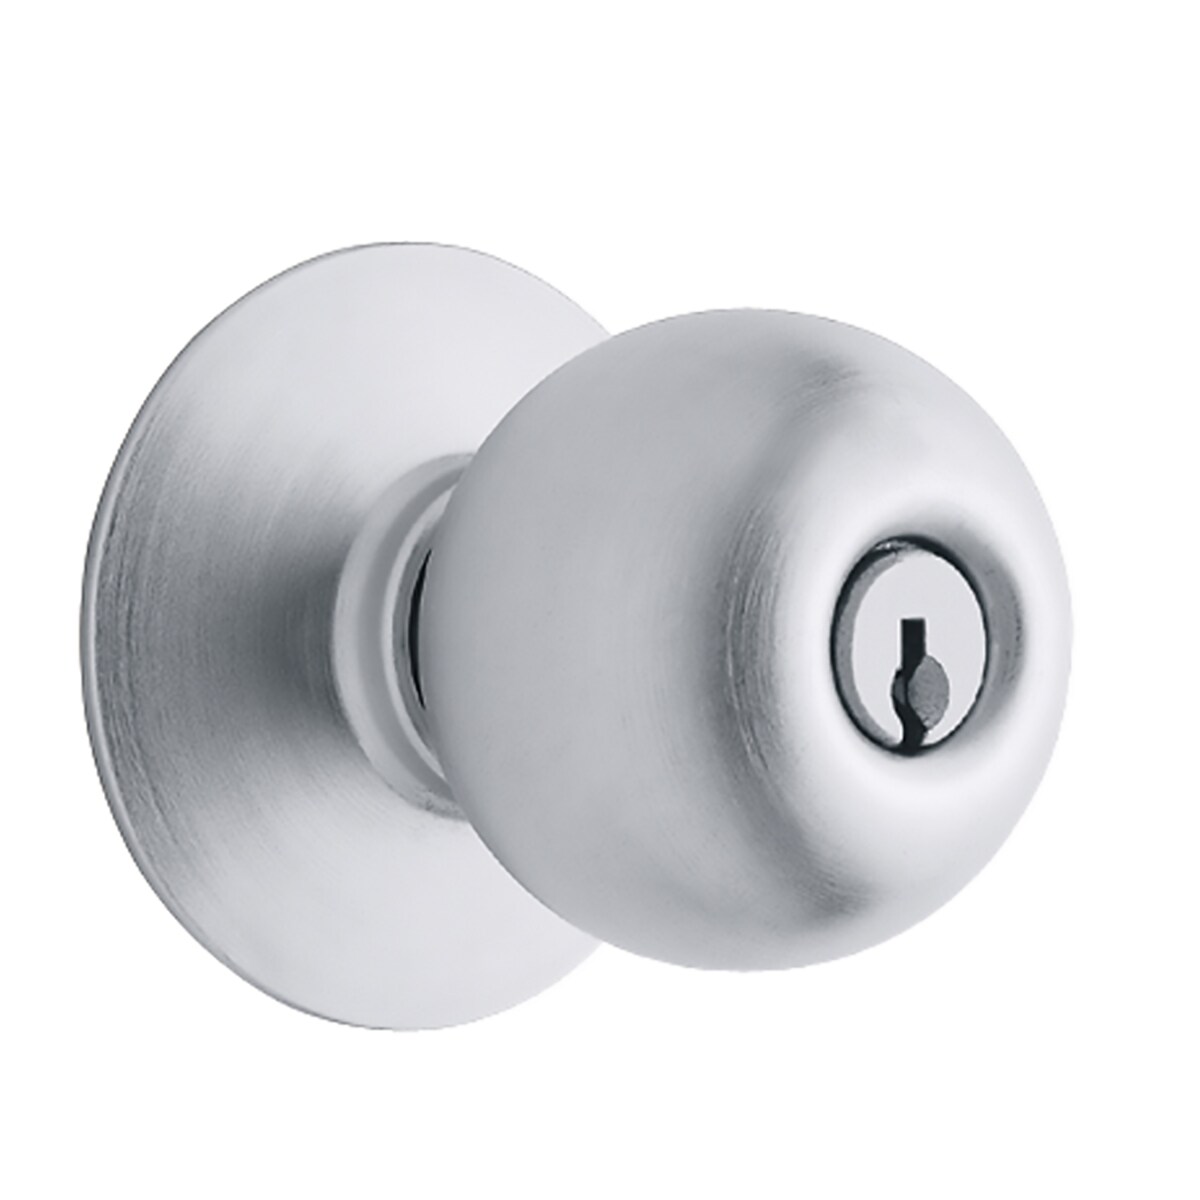 Stanley 93080-001 Circa Entry Knob featuring SmartKey in Satin Chrome 